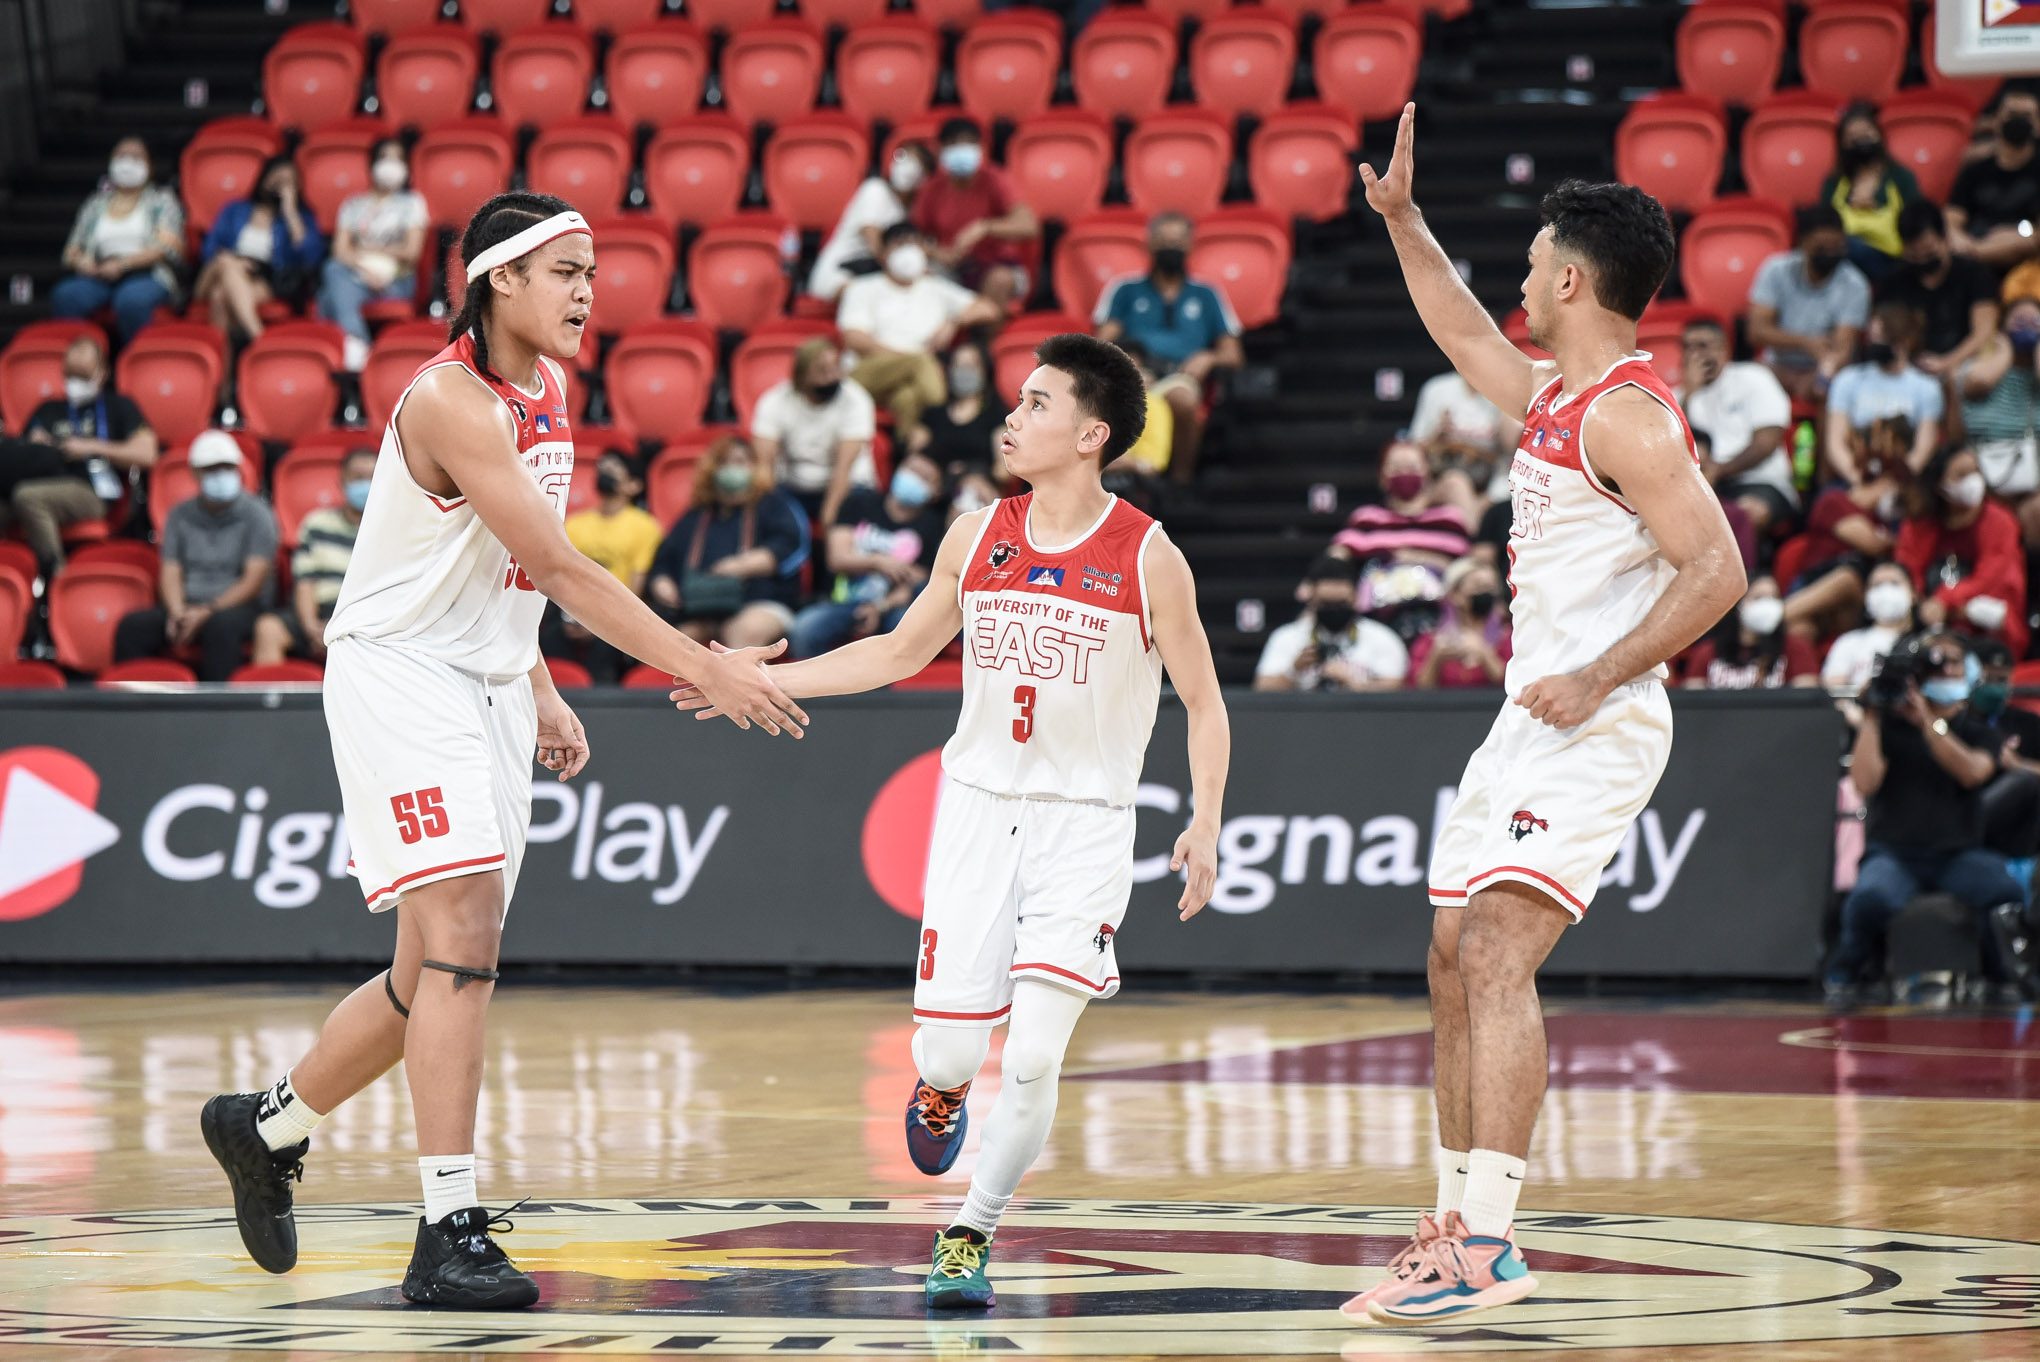 ‘No choice but to go up’: Santiago relishes first UE win after snapping 15-game skid